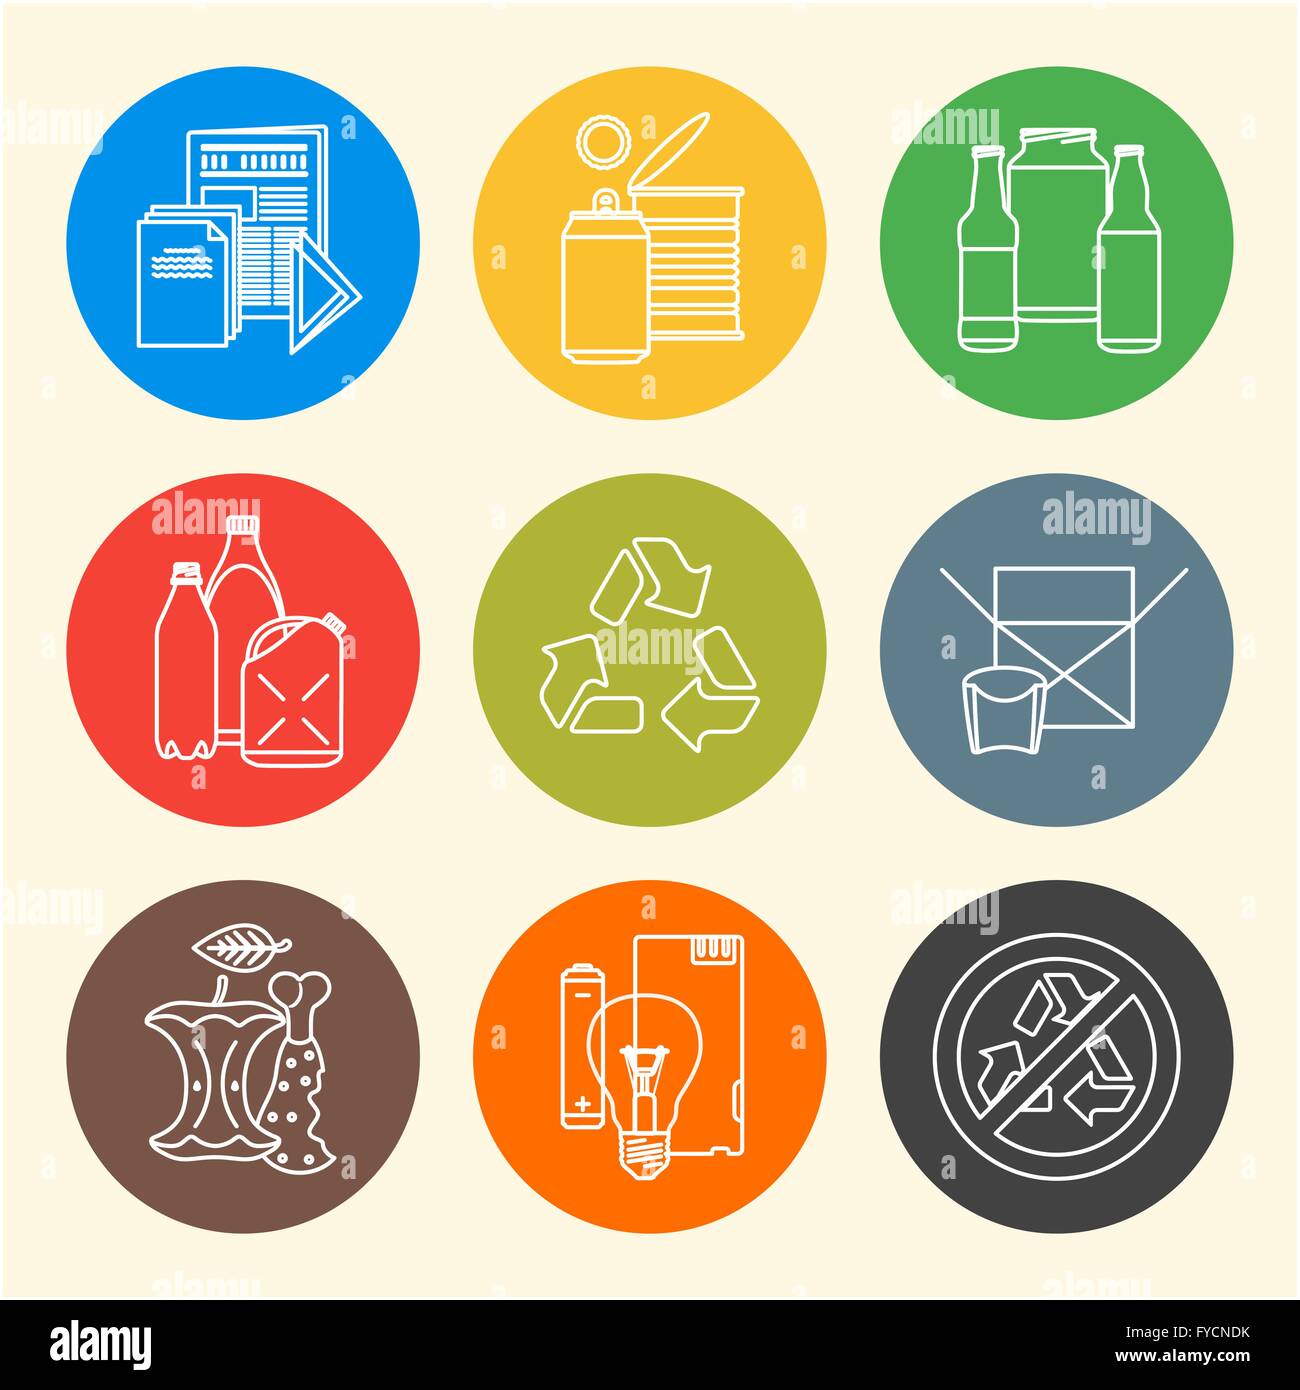 Vector waste sorting bins icon. Colorful organic, paper, metal, glass,  plastic garbage boxes. Earth day or zero waste ecological concept. Rubbish  or junk recycling containers illustration 24689865 Vector Art at Vecteezy